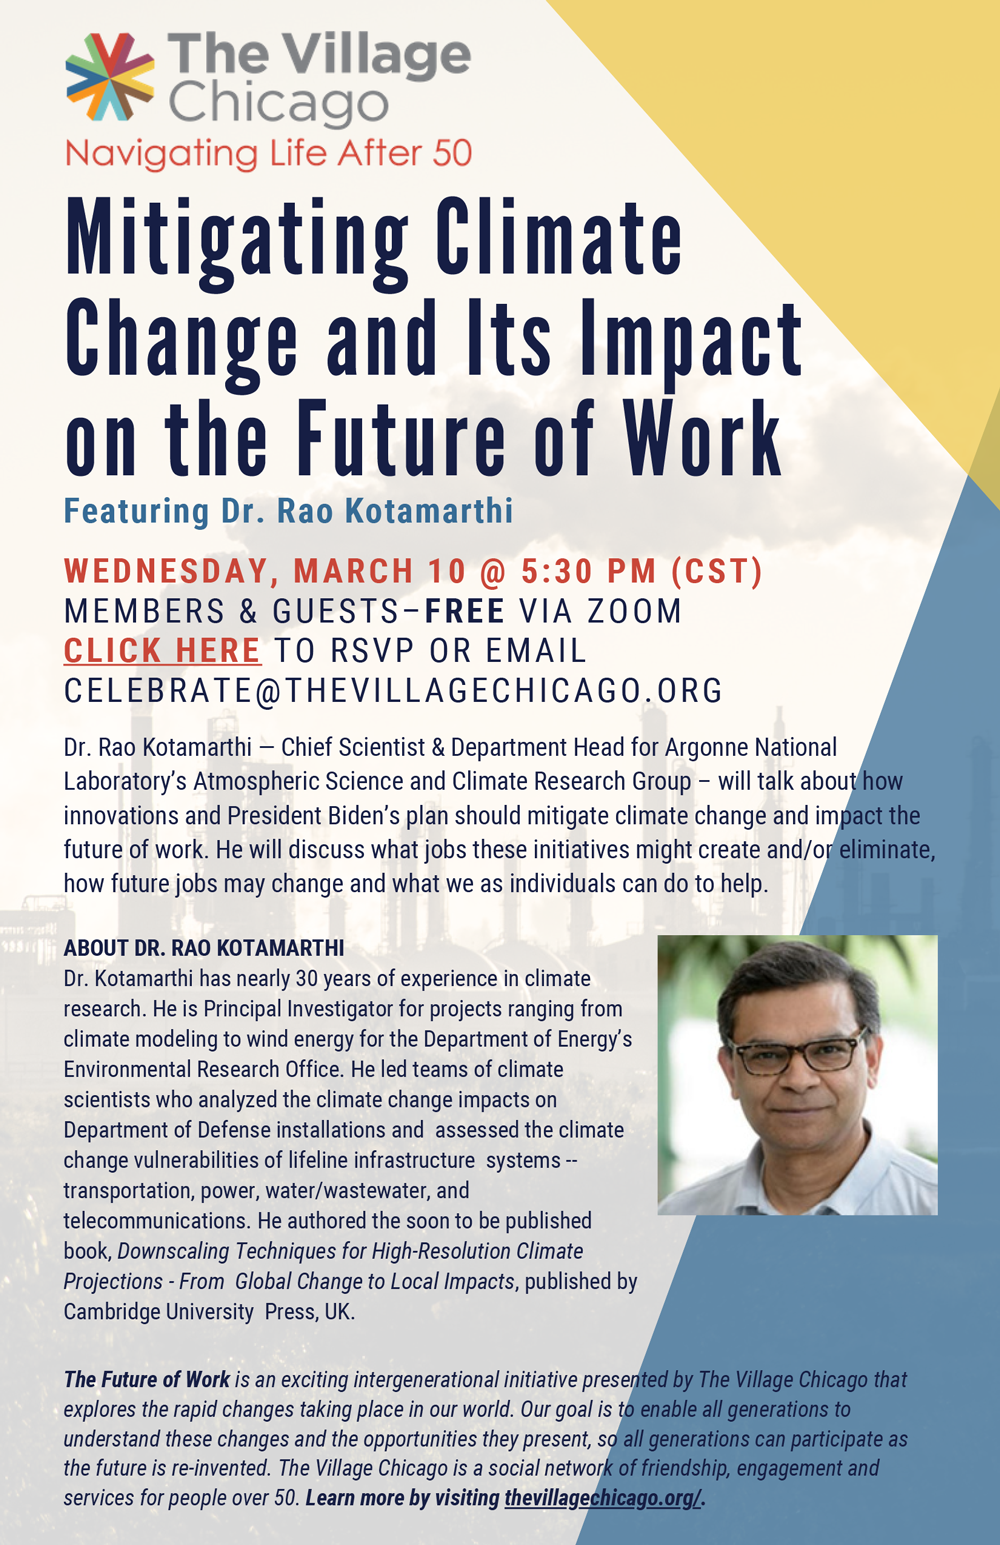 Mitigating Climate Change - Its Impact on the Future of Work